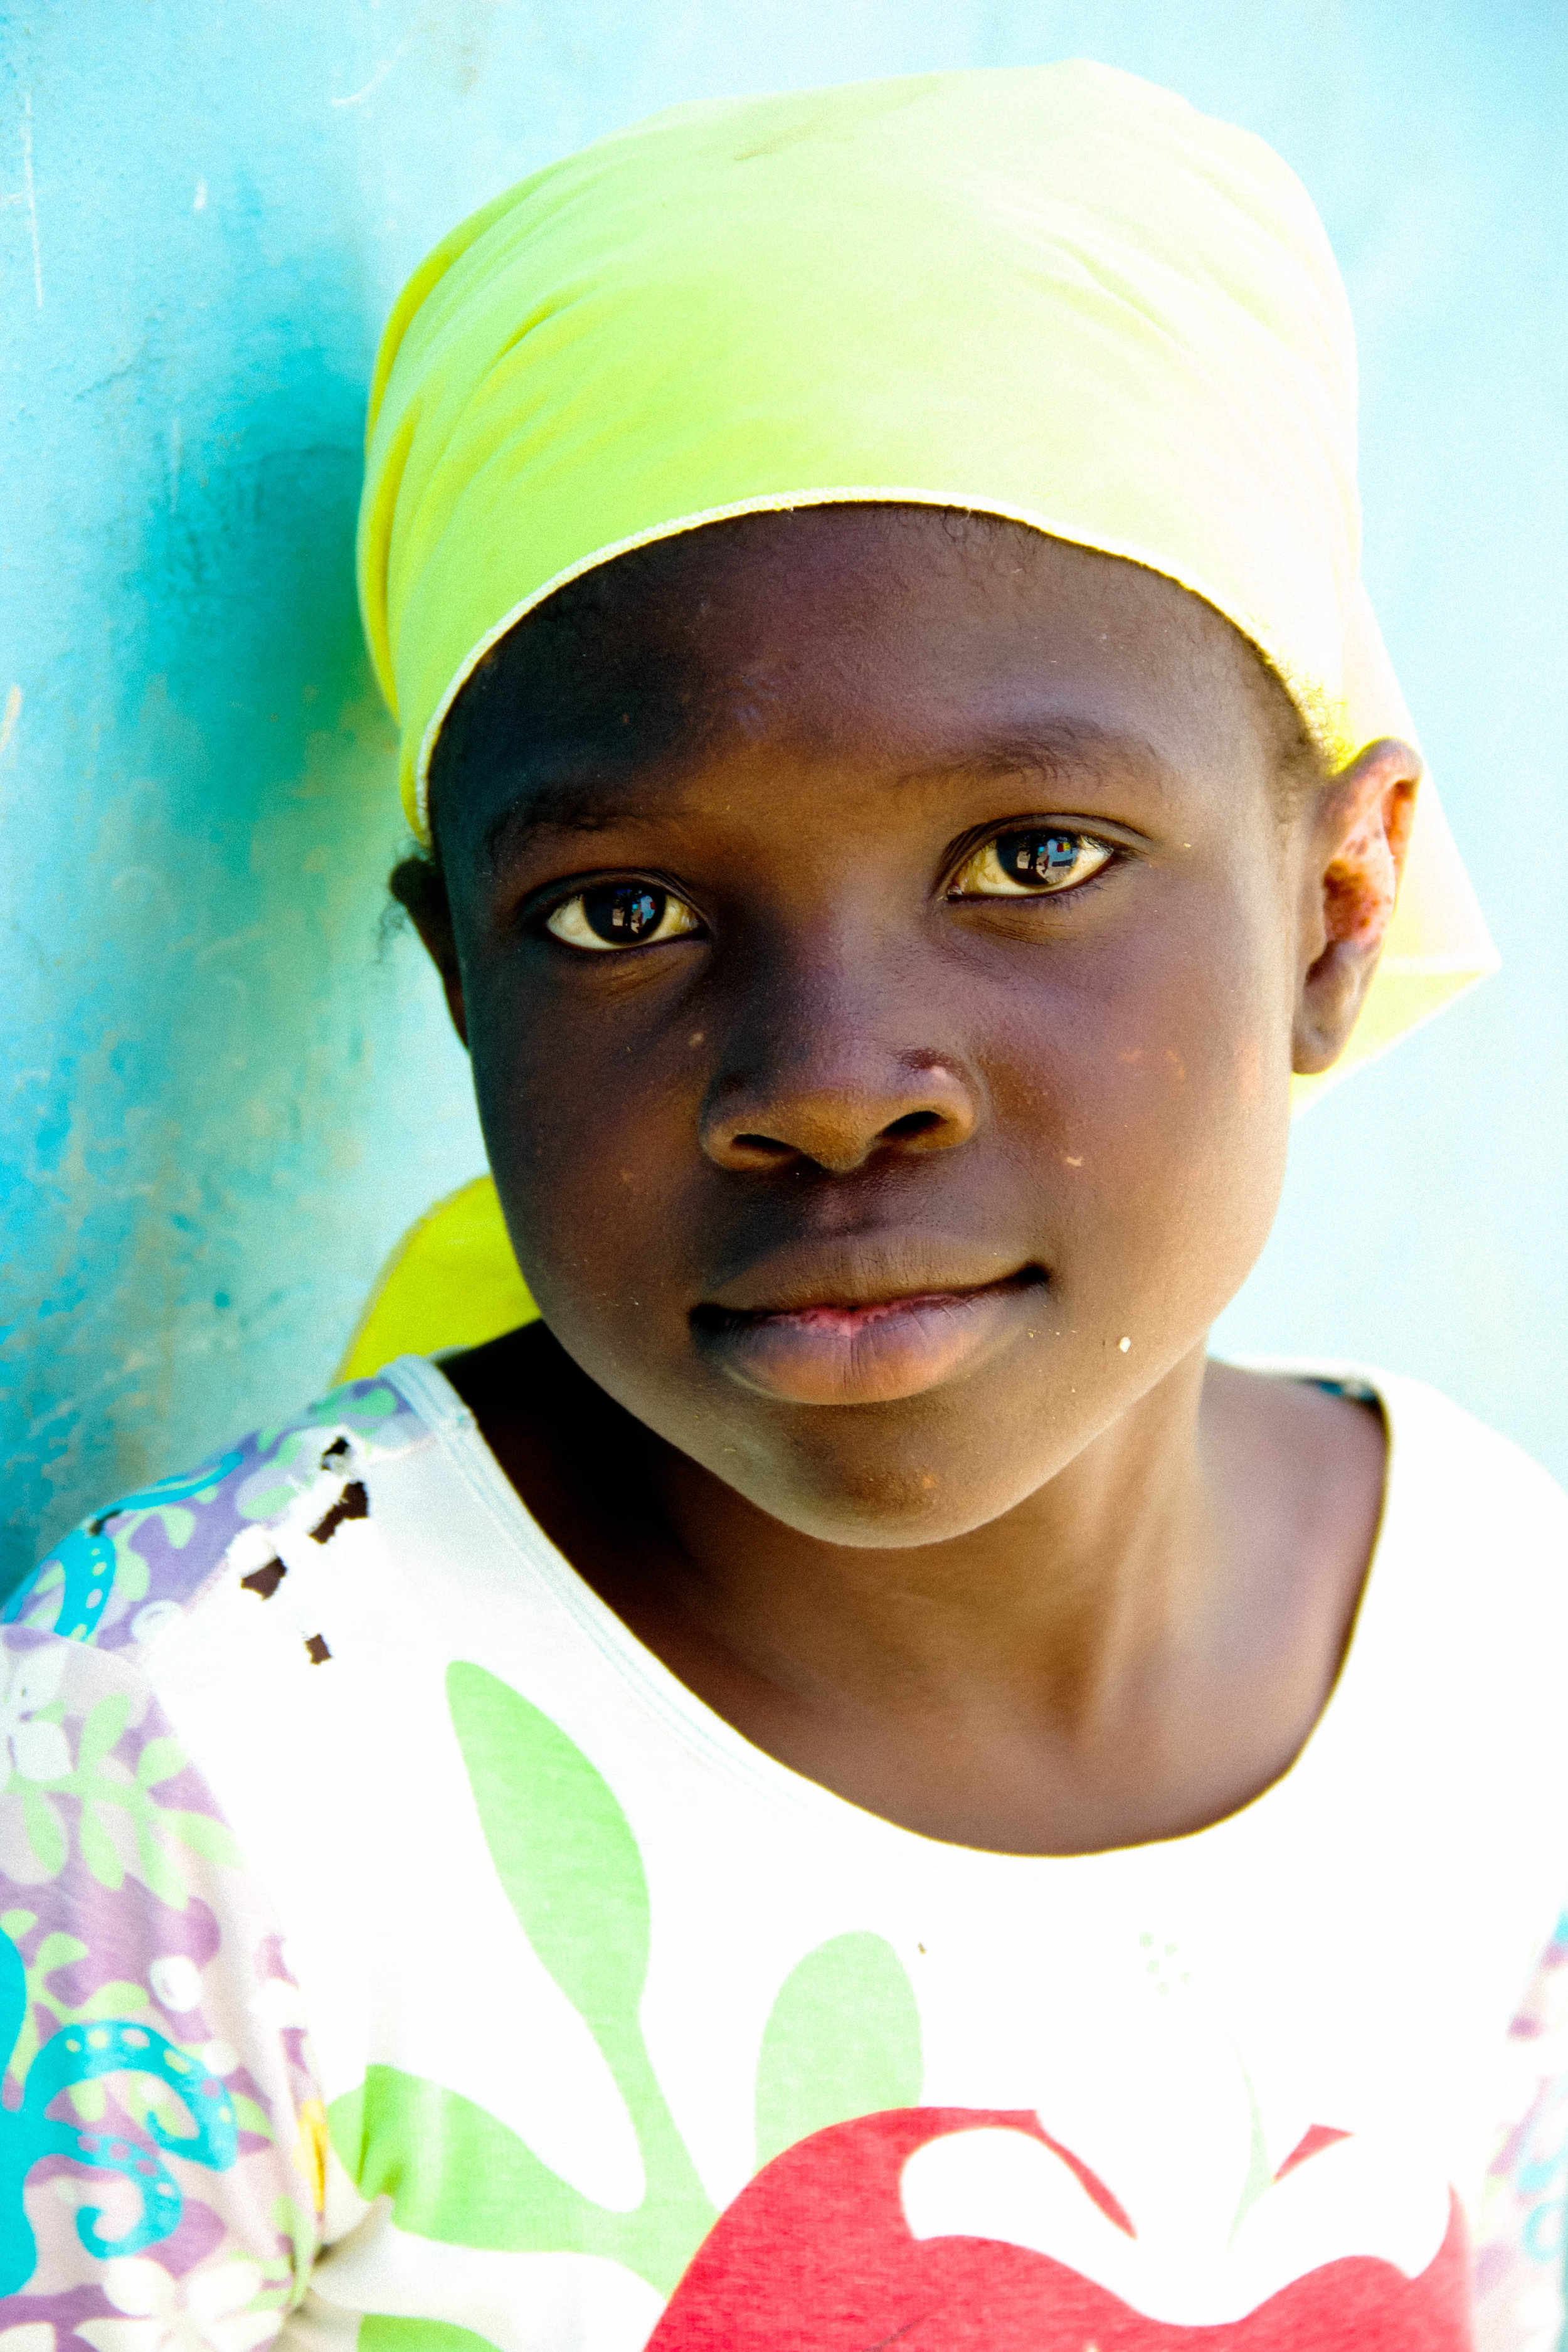 JacobGrantPhotography_Portraits, Haitian Child against Blue Wall